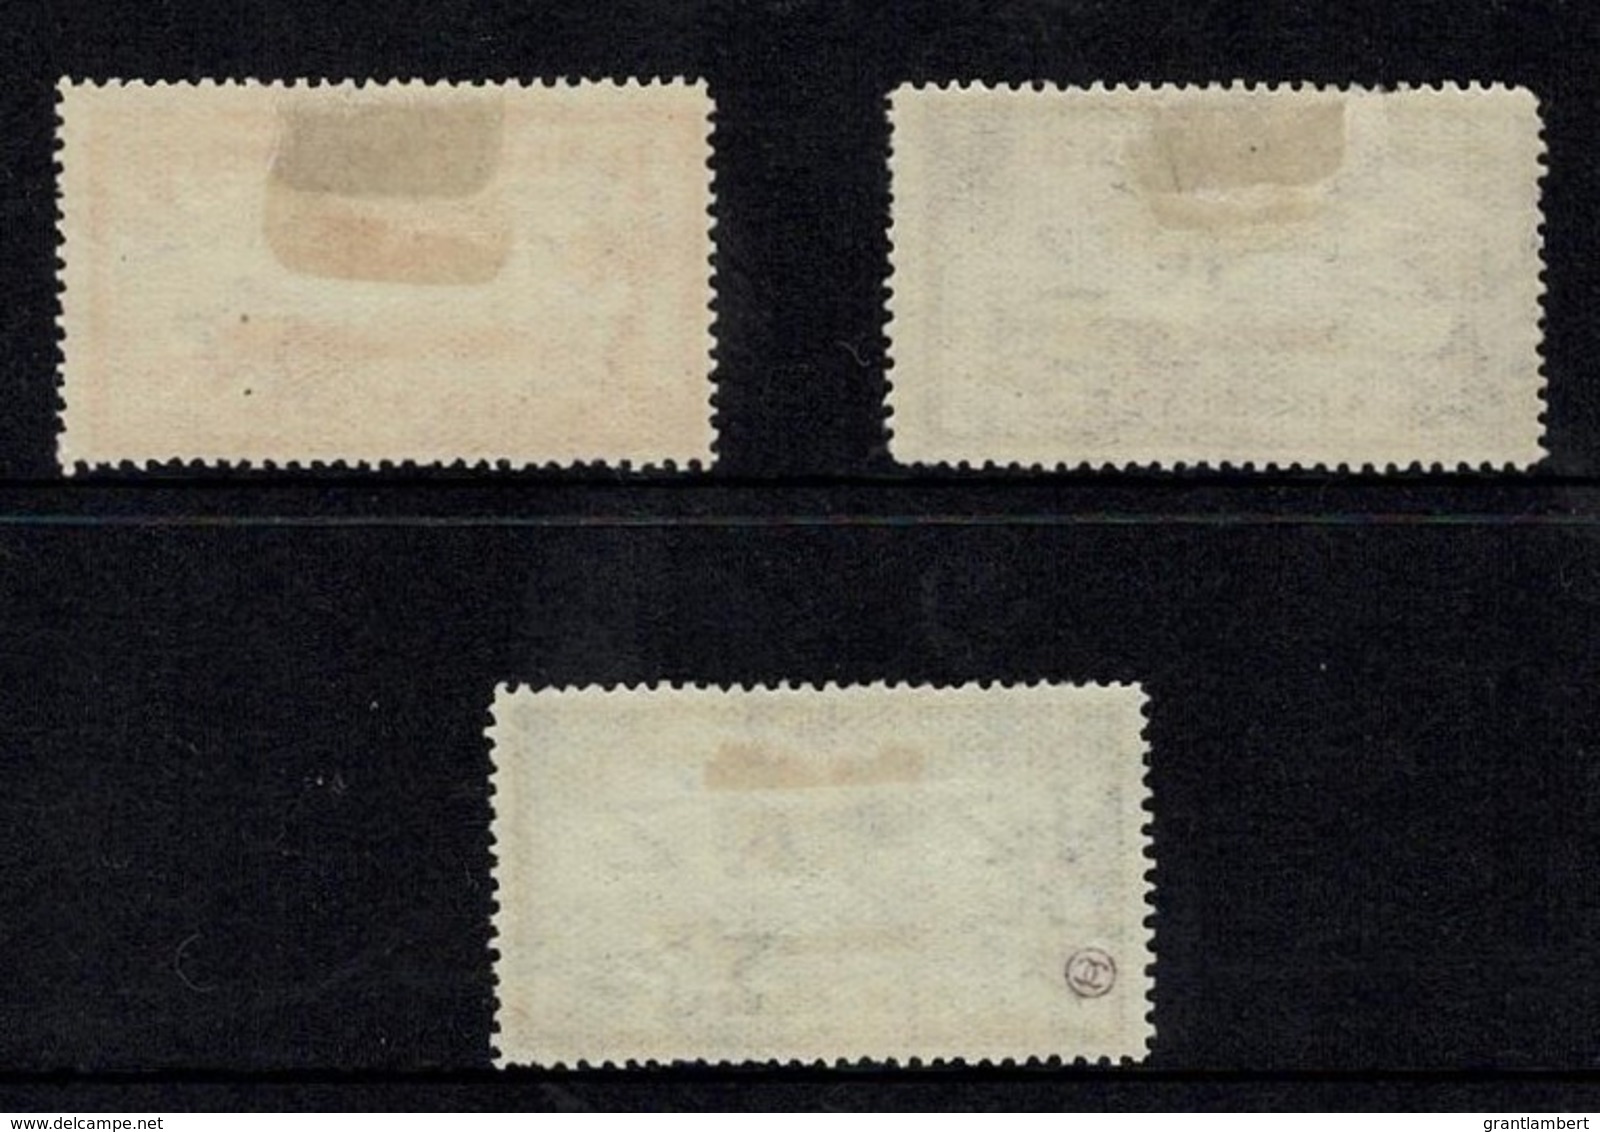 New Zealand 1935 Air Mail Set Of 3 MH - - - Unused Stamps